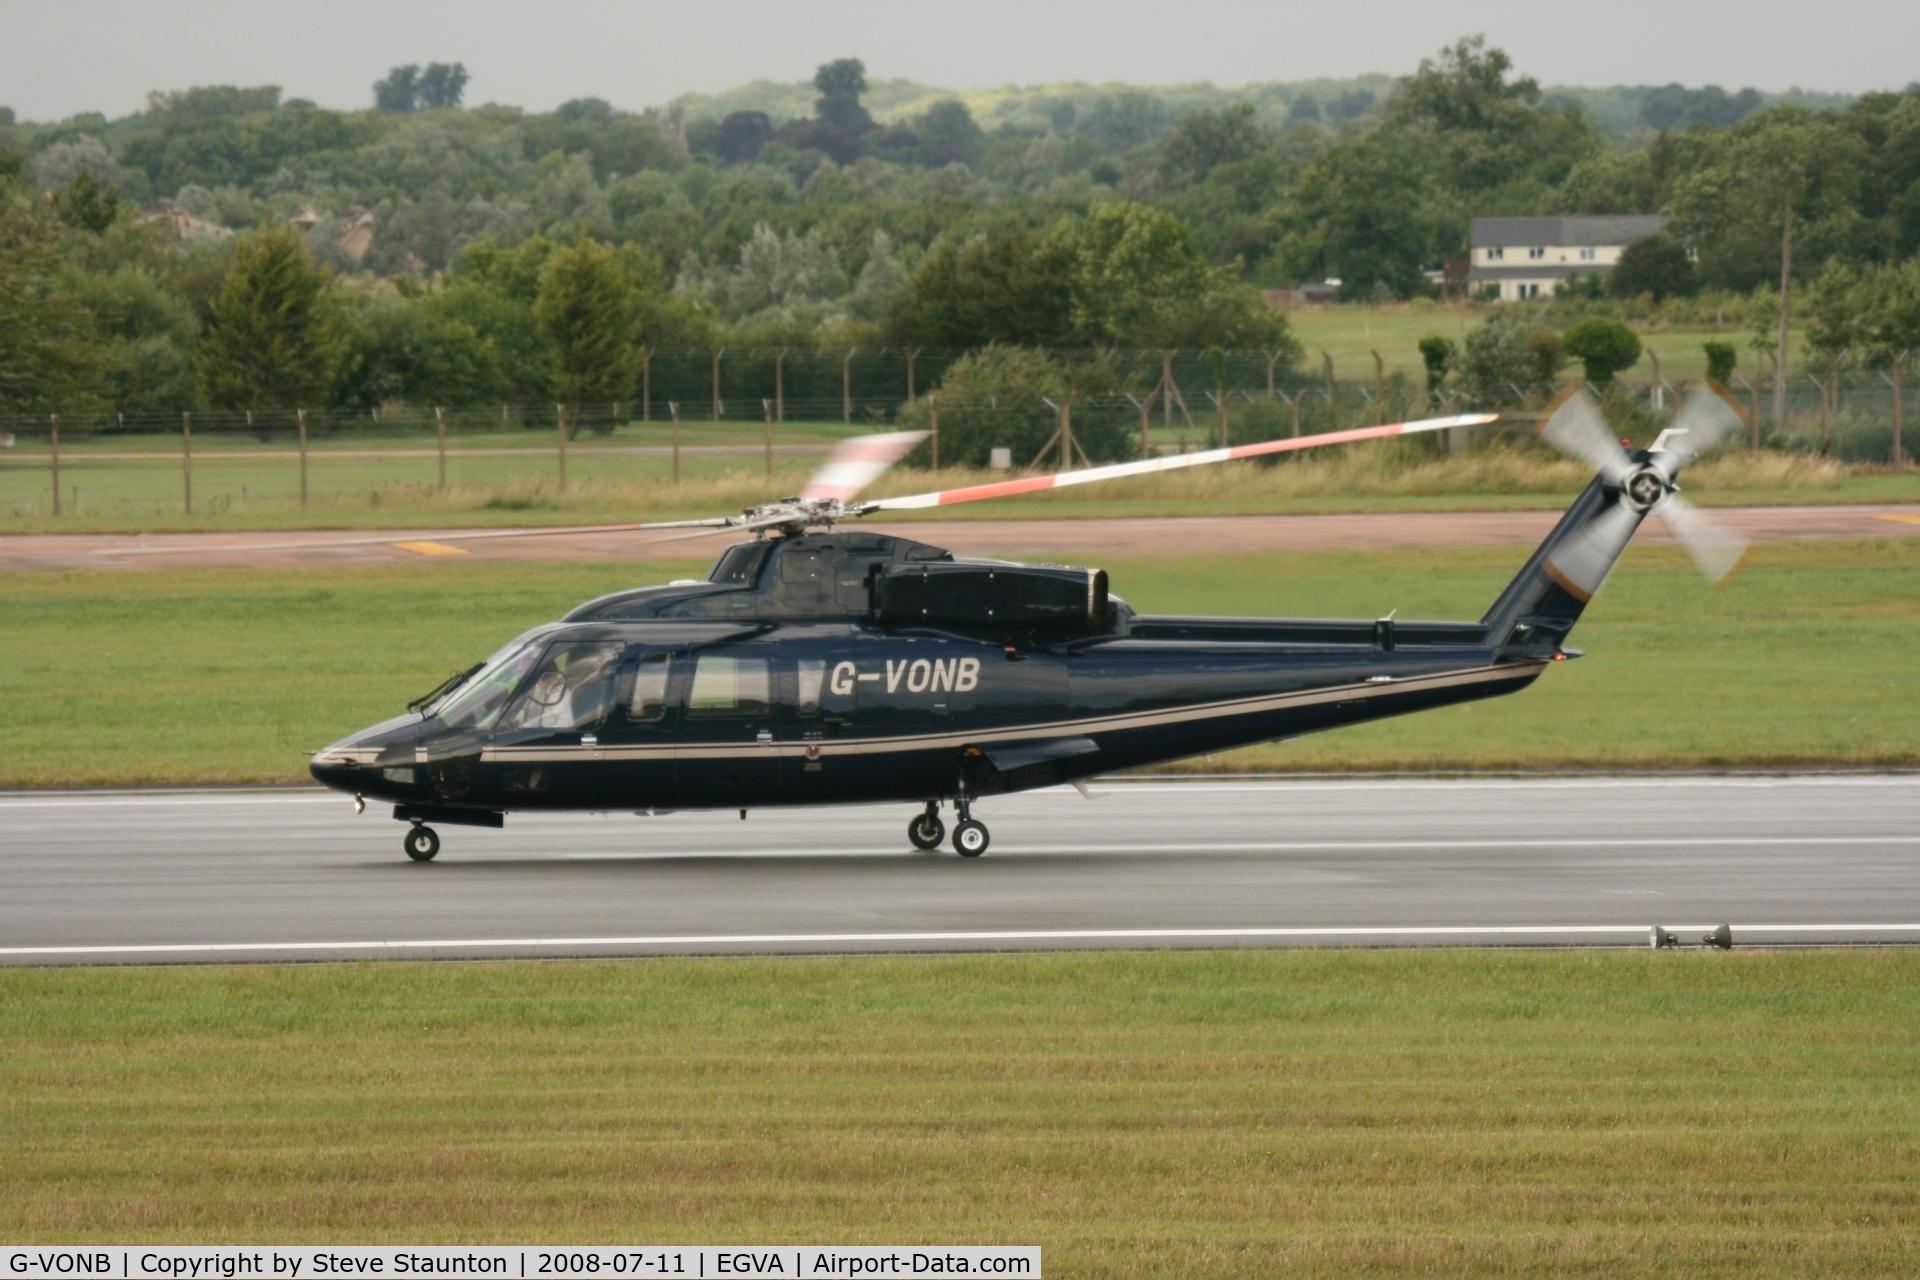 G-VONB, 1992 Sikorsky S-76B C/N 760399, Taken at the Royal International Air Tattoo 2008 during arrivals and departures (show days cancelled due to bad weather)